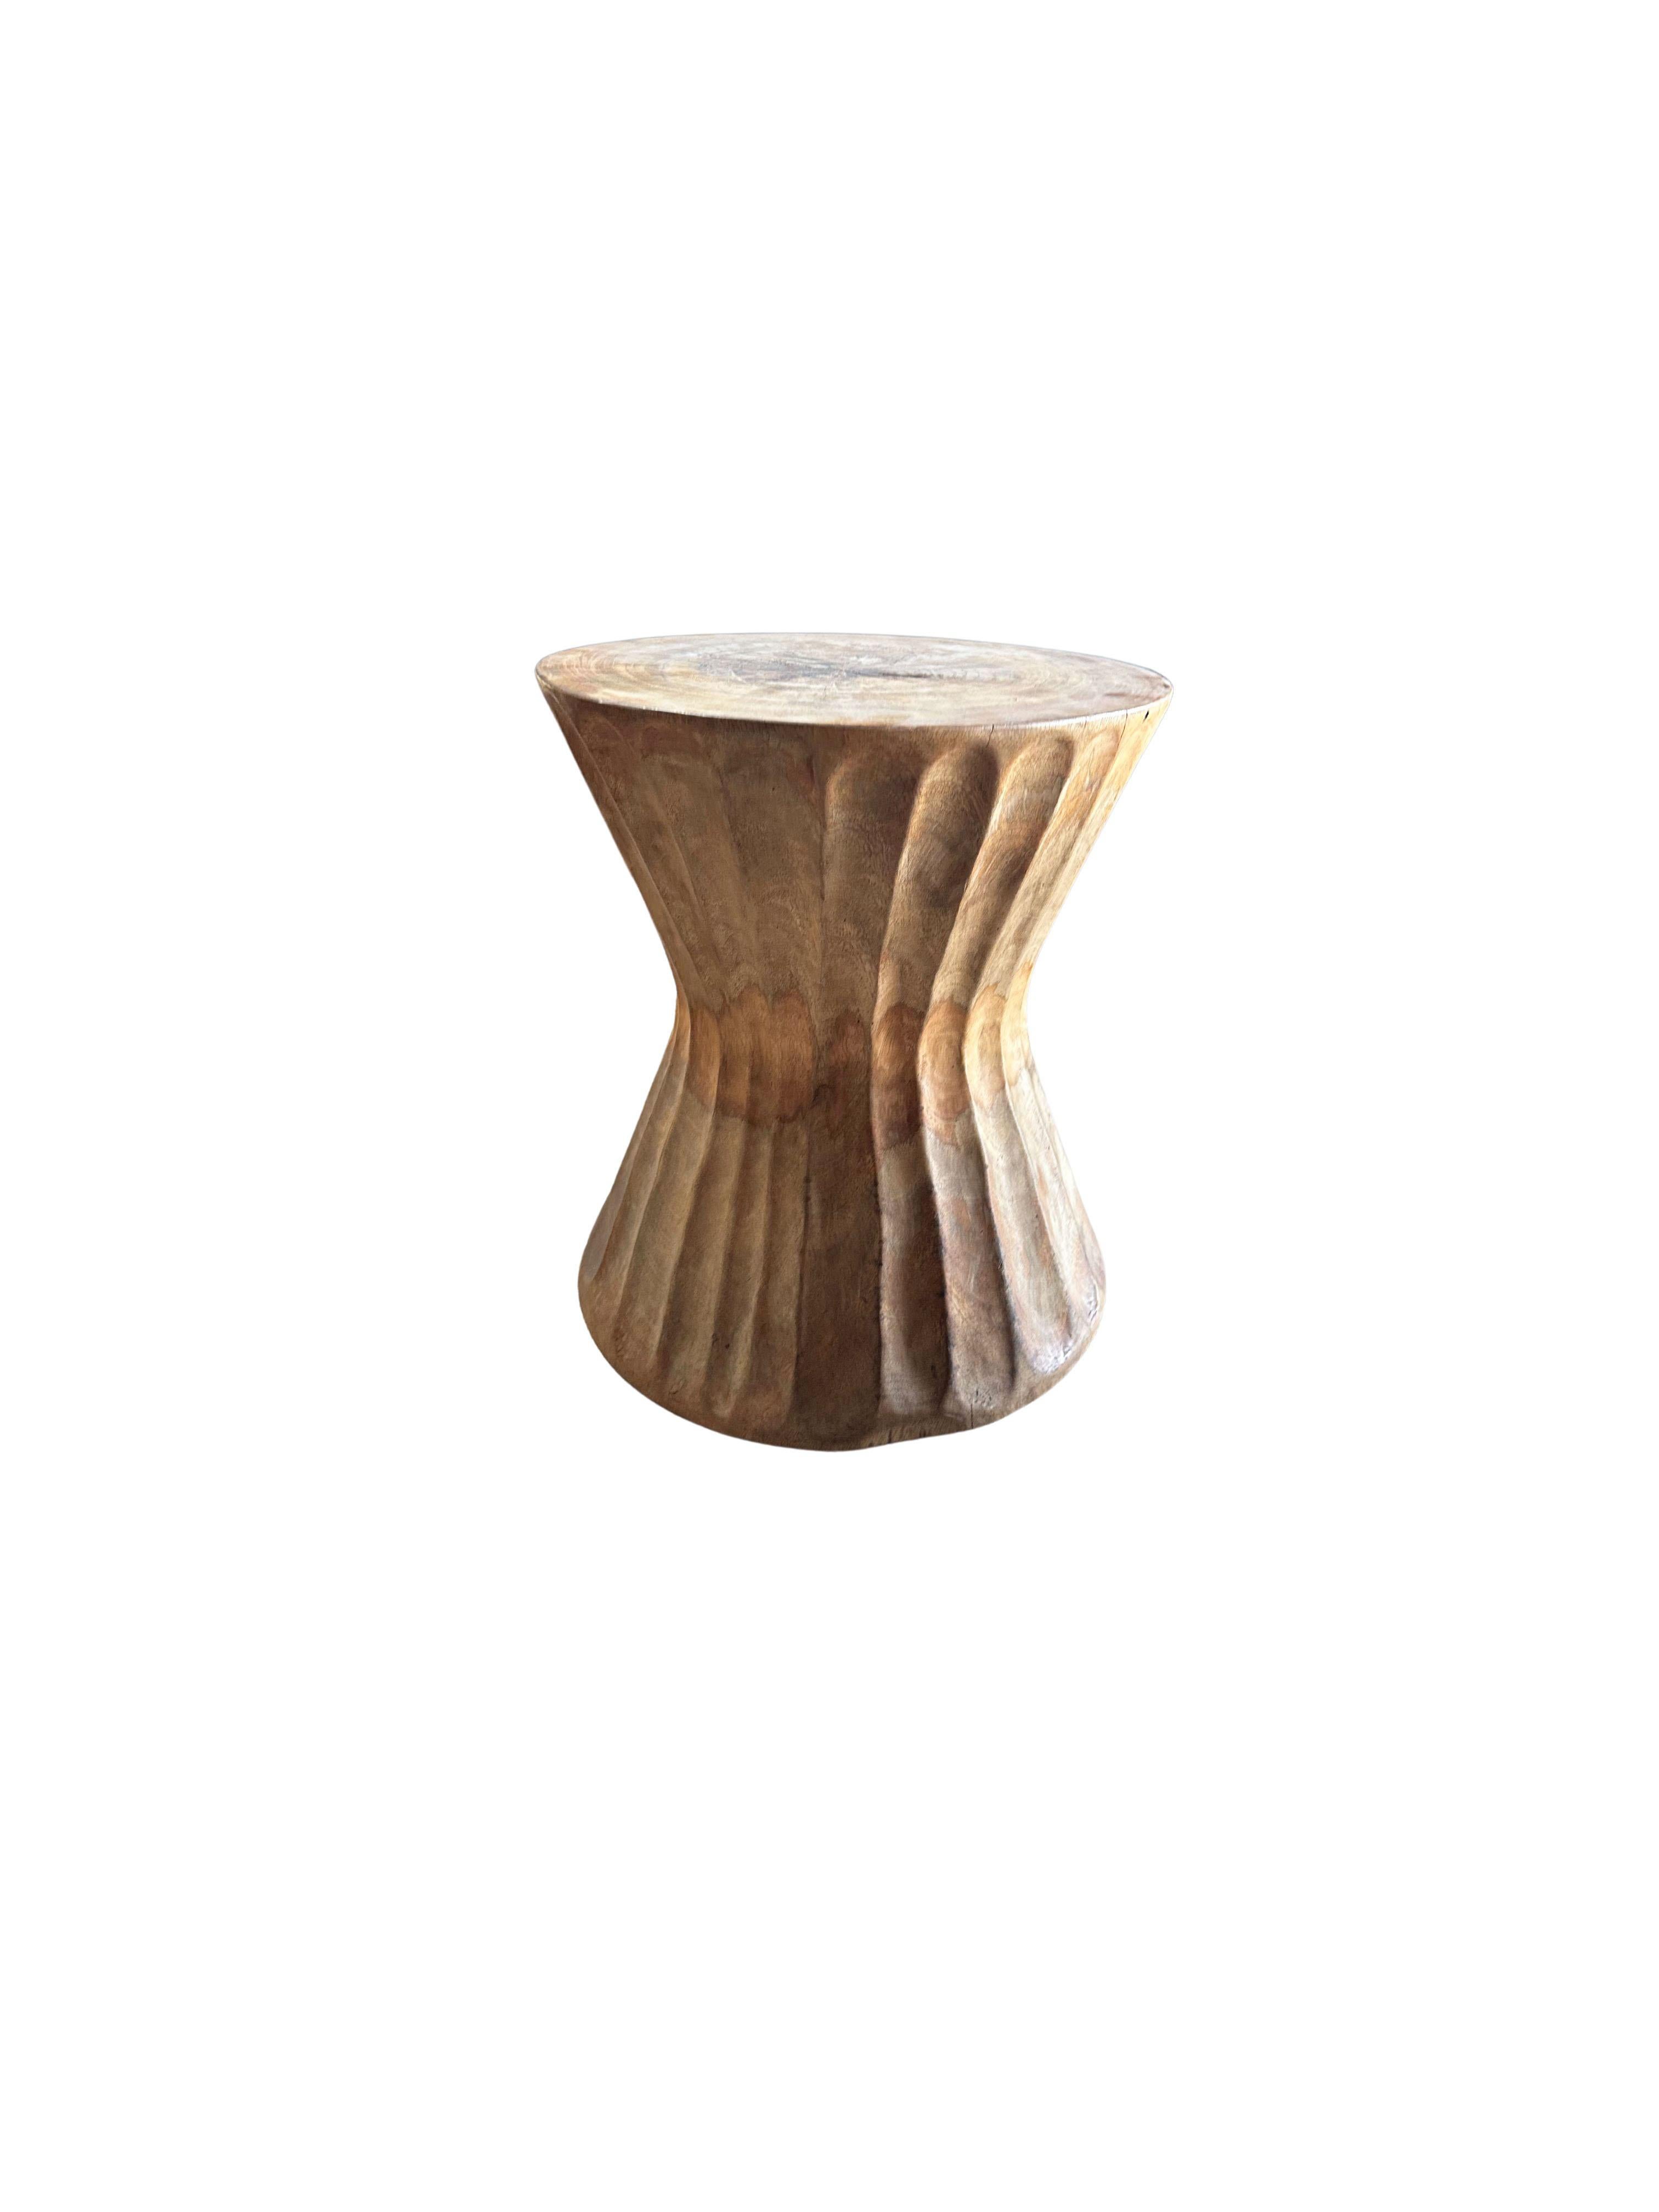 Indonesian Round Mango Wood Side Table, Carved Detailing, Modern Organic For Sale